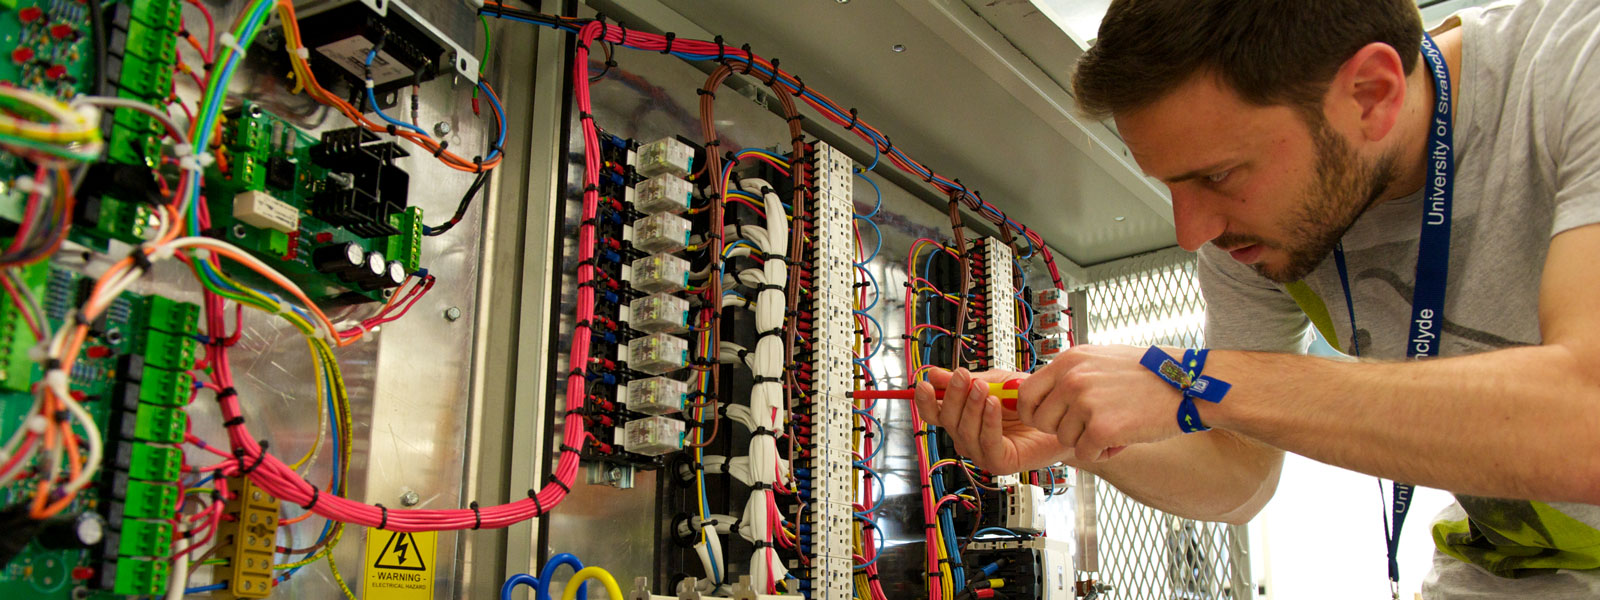 a researcher using a screwdriver on a large piece of equipment covered in colourful wires